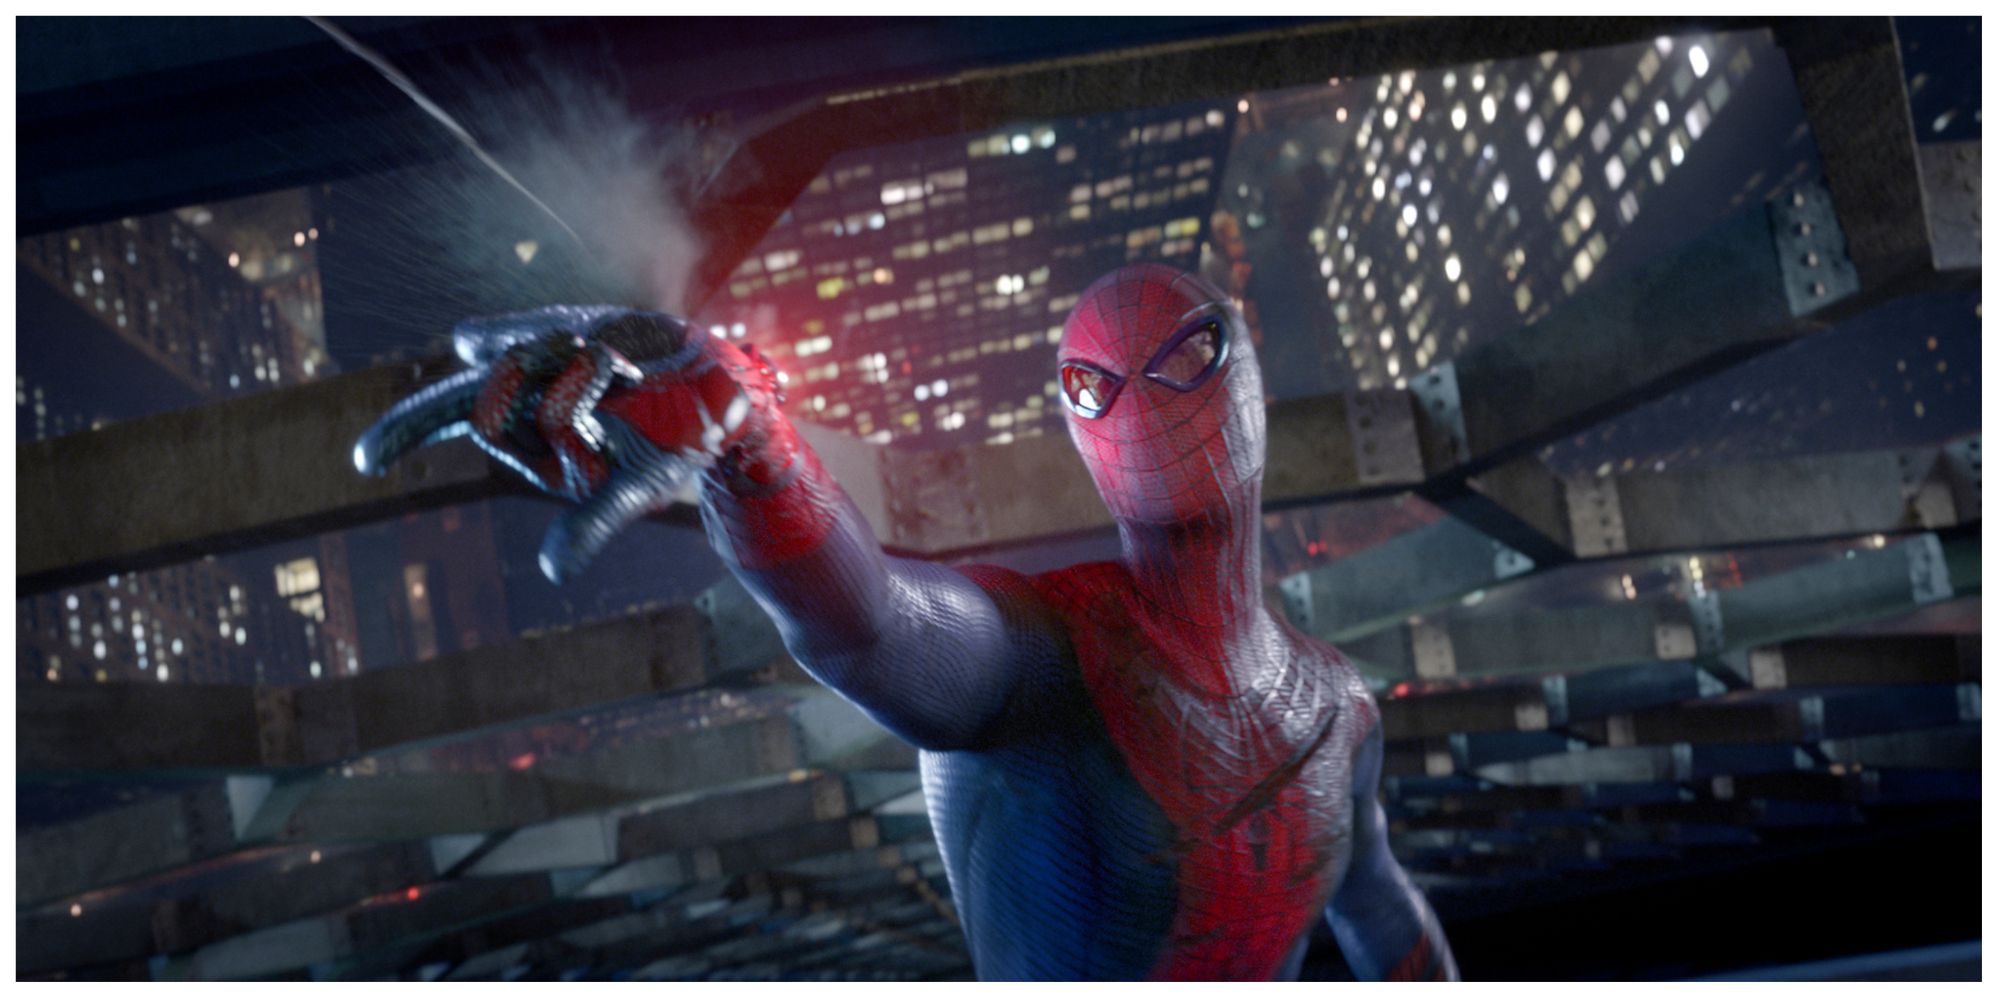 Andrew Garfied as Spider-Man shooting web in The Amazing Spider-Man